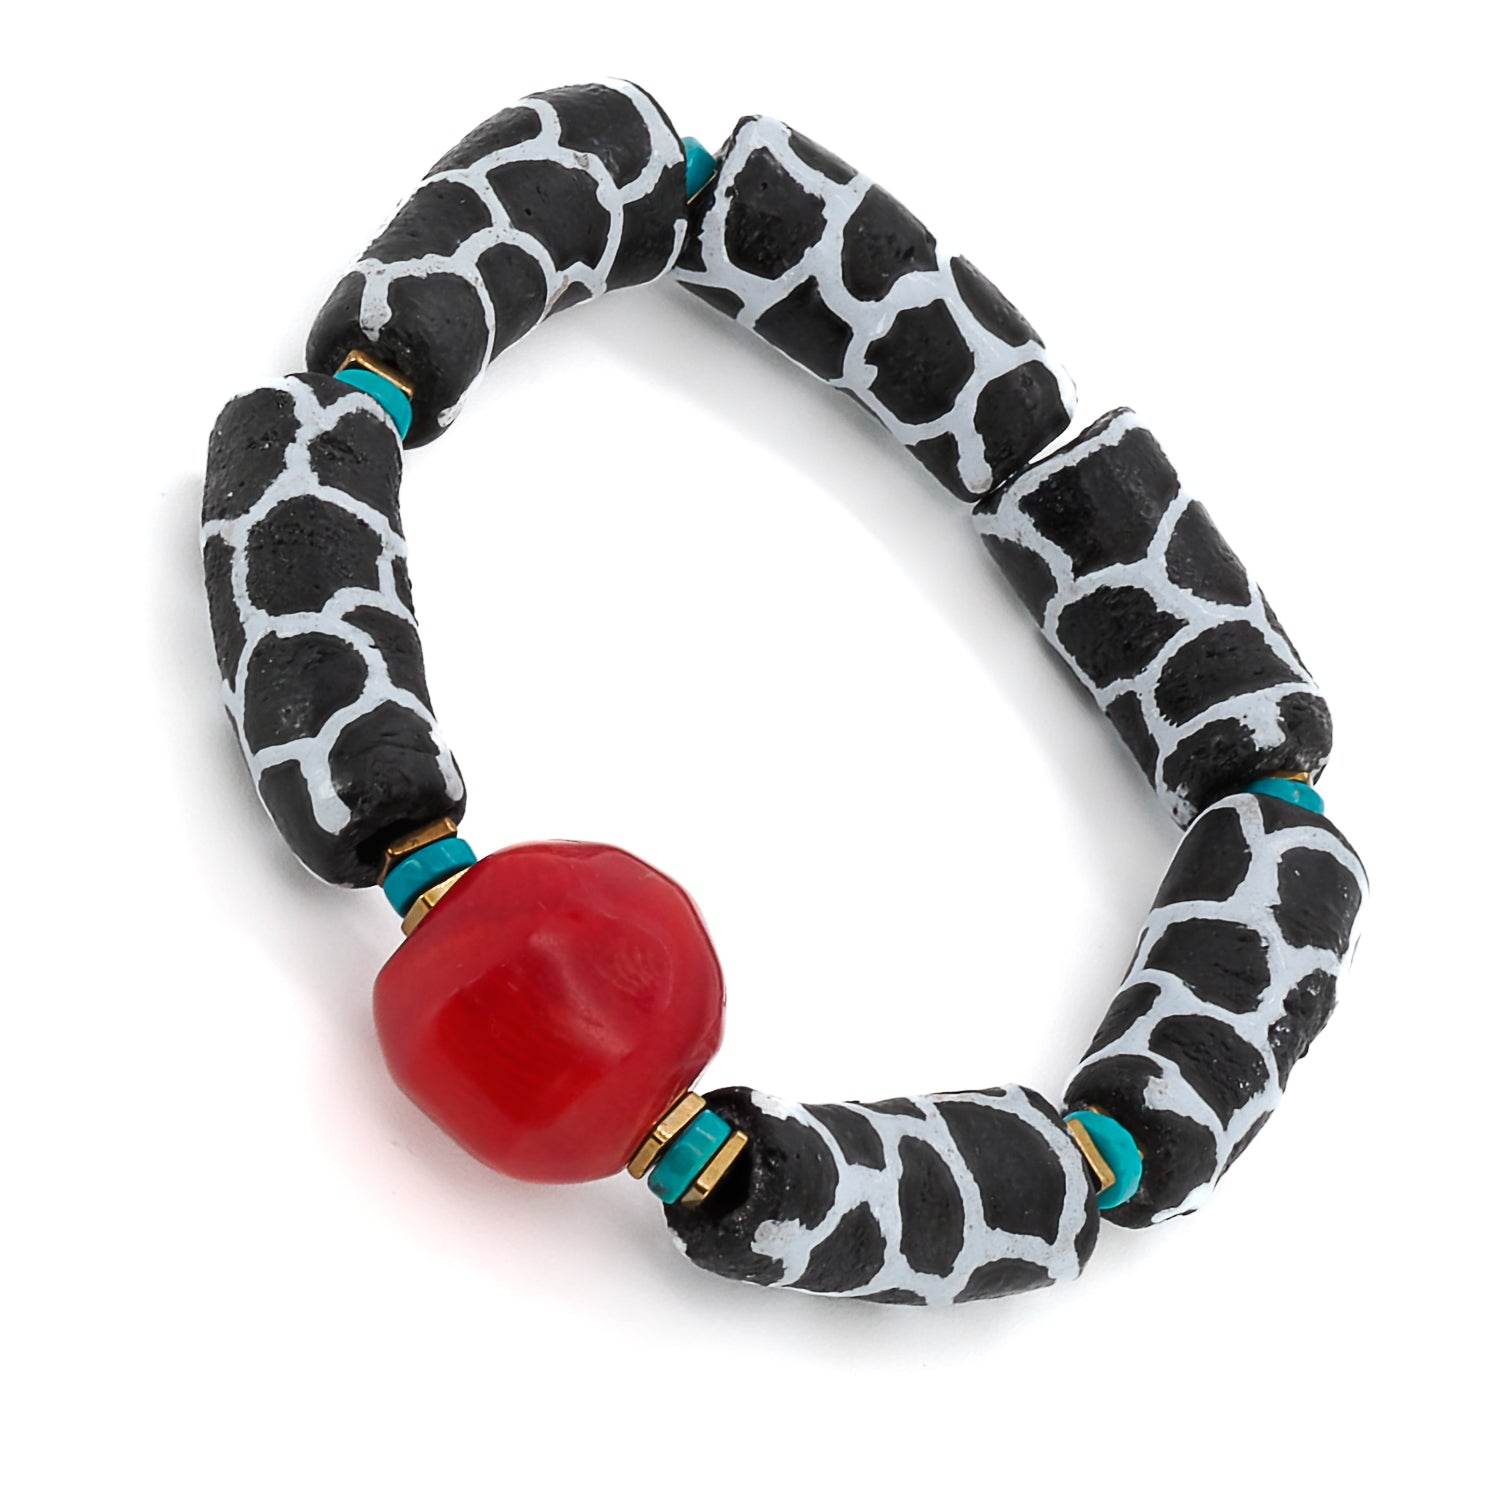 Close-up of the African black and white zebra tube beads used in the bracelet, adding a unique and striking pattern to the design.